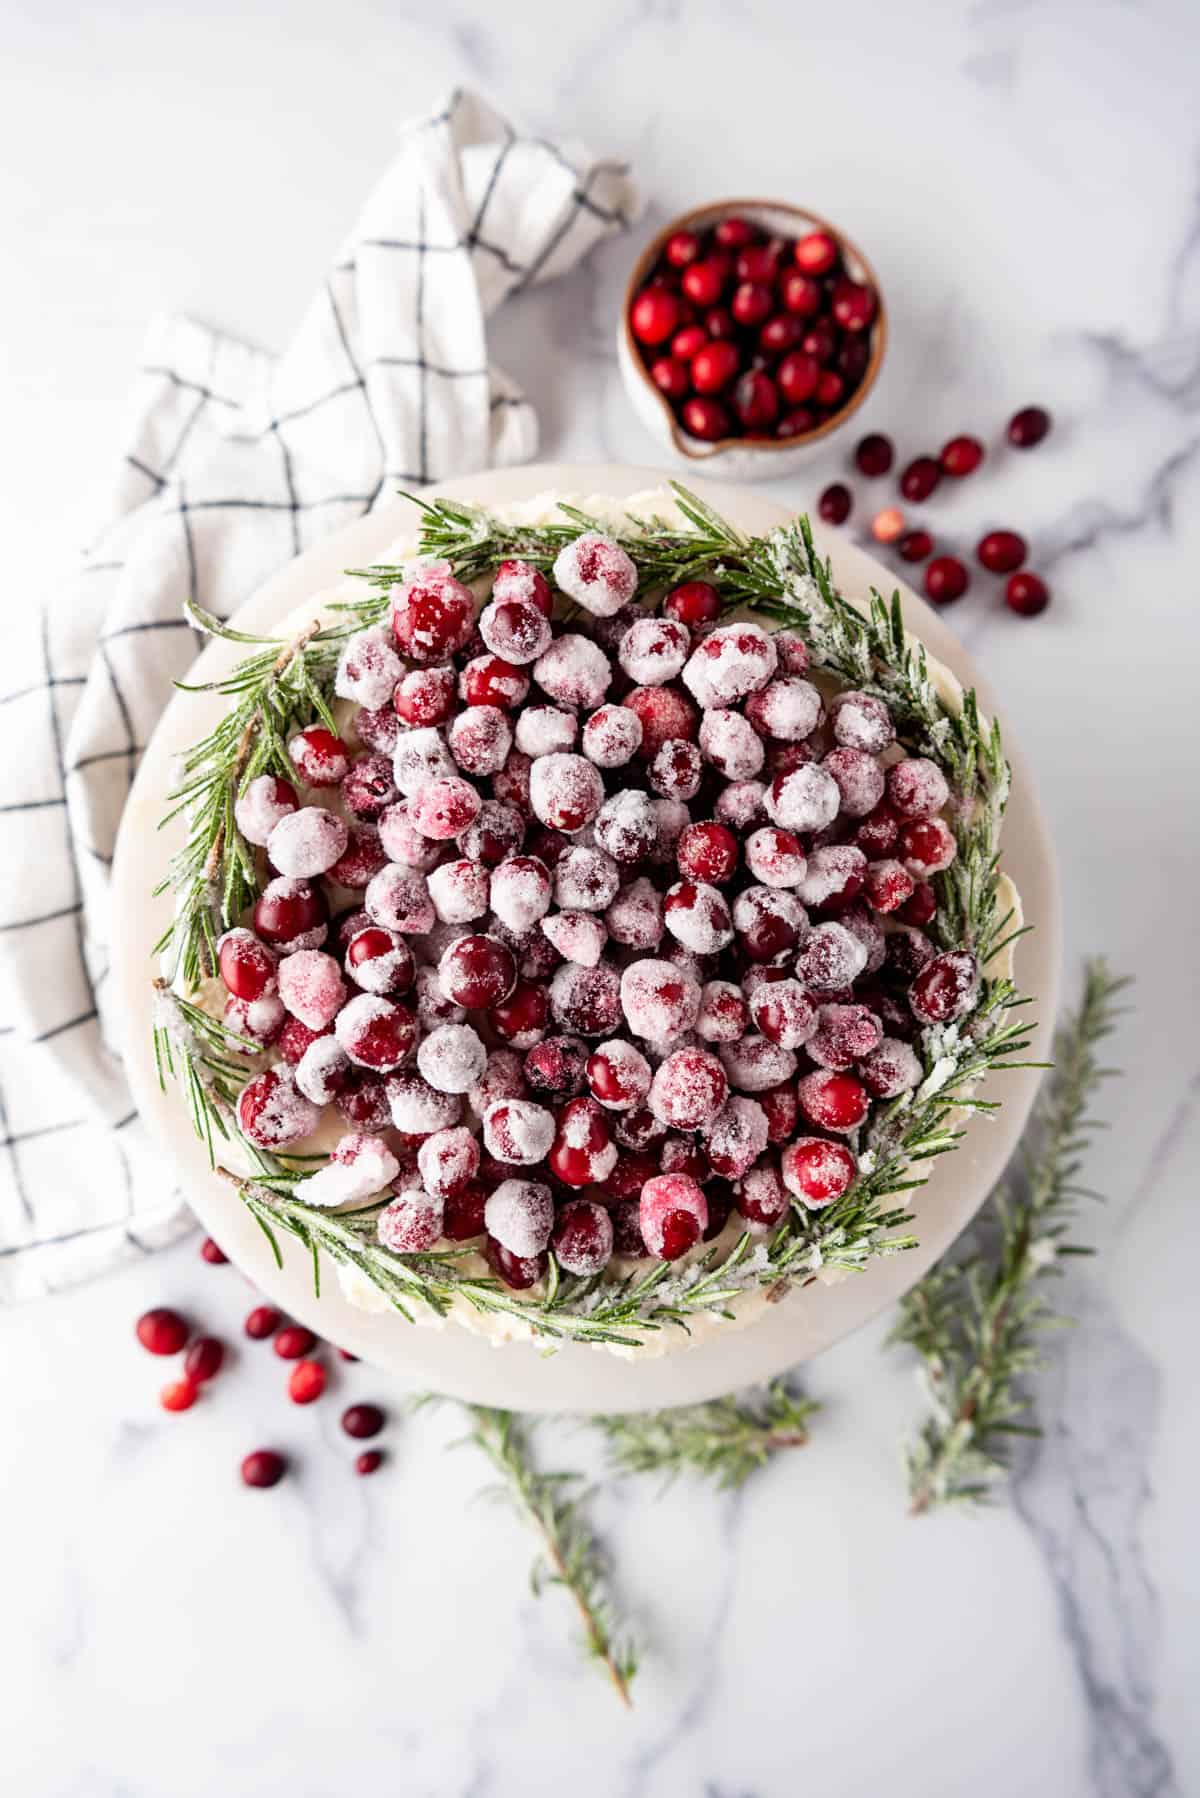 Sugared cranberries and rosemary piled on top of a cranberry cheesecake.